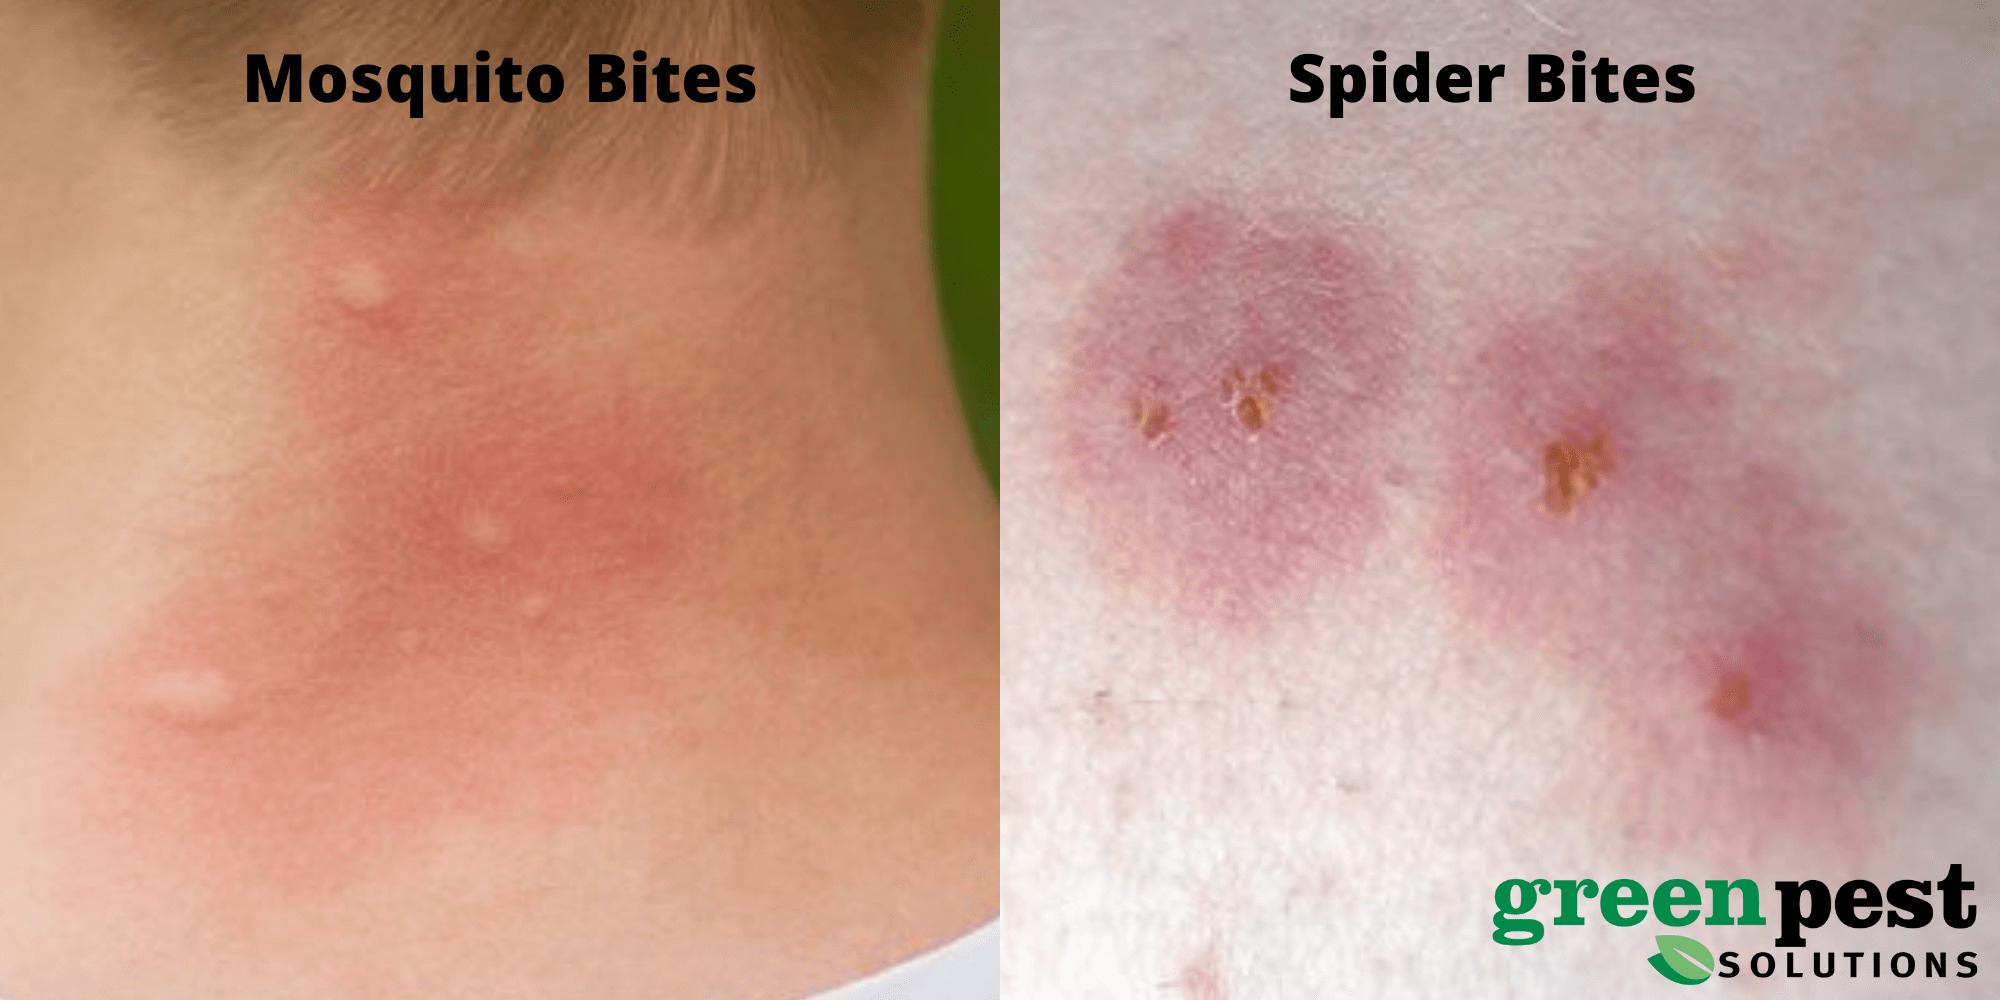 What is the Difference between Mosquito Bites And Spider Bites?